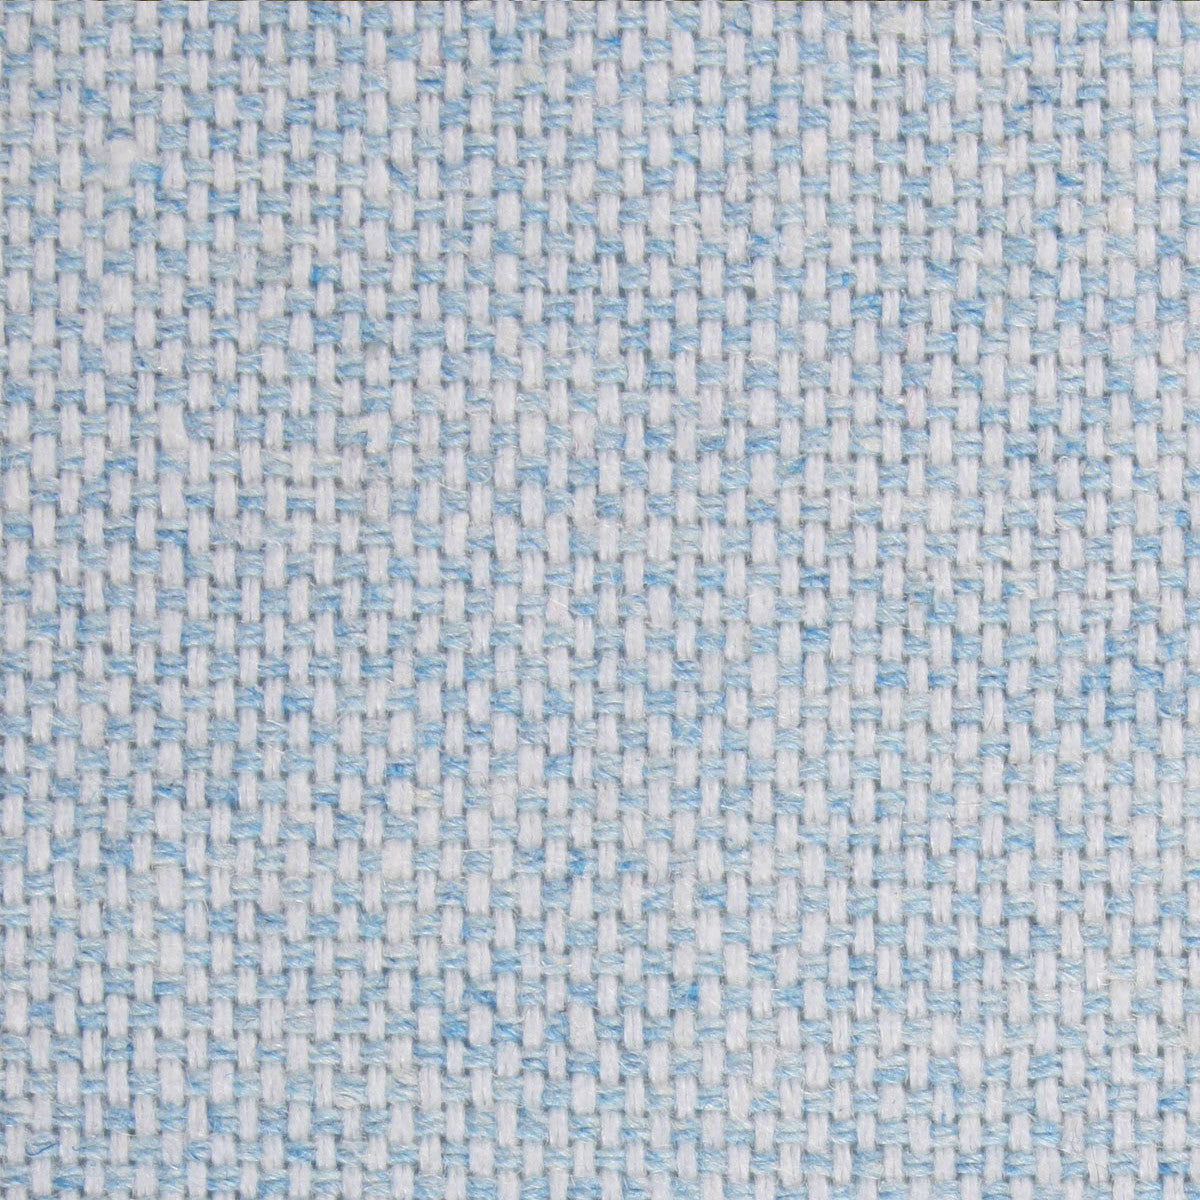 Sky Blue Donegal Linen Fabric Pocket Square